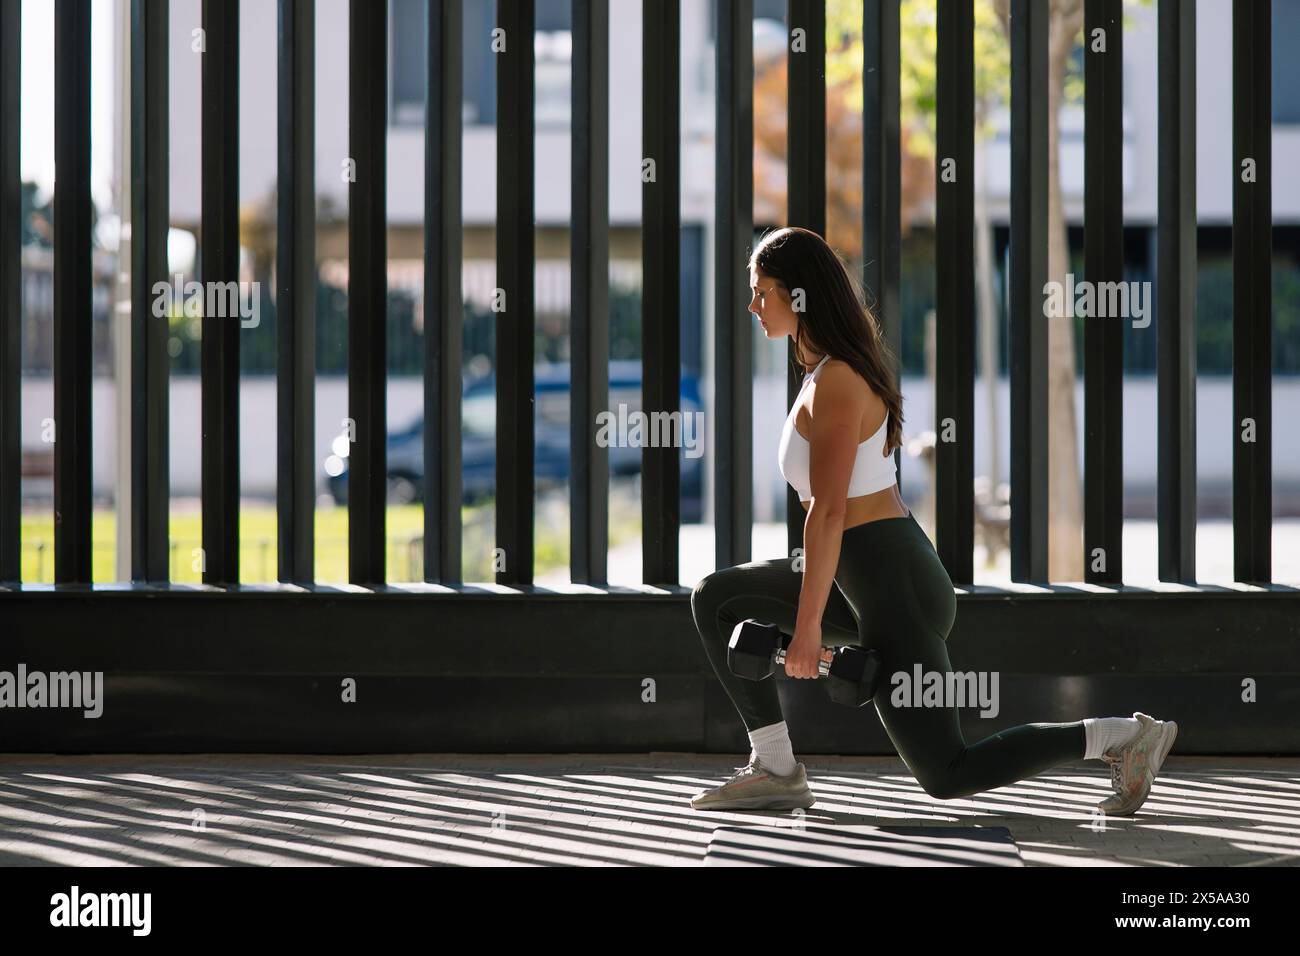 A focused young woman in sportswear performs lunges with a dumbbell in a bright, sunlit home environment, depicting a healthy lifestyle Stock Photo